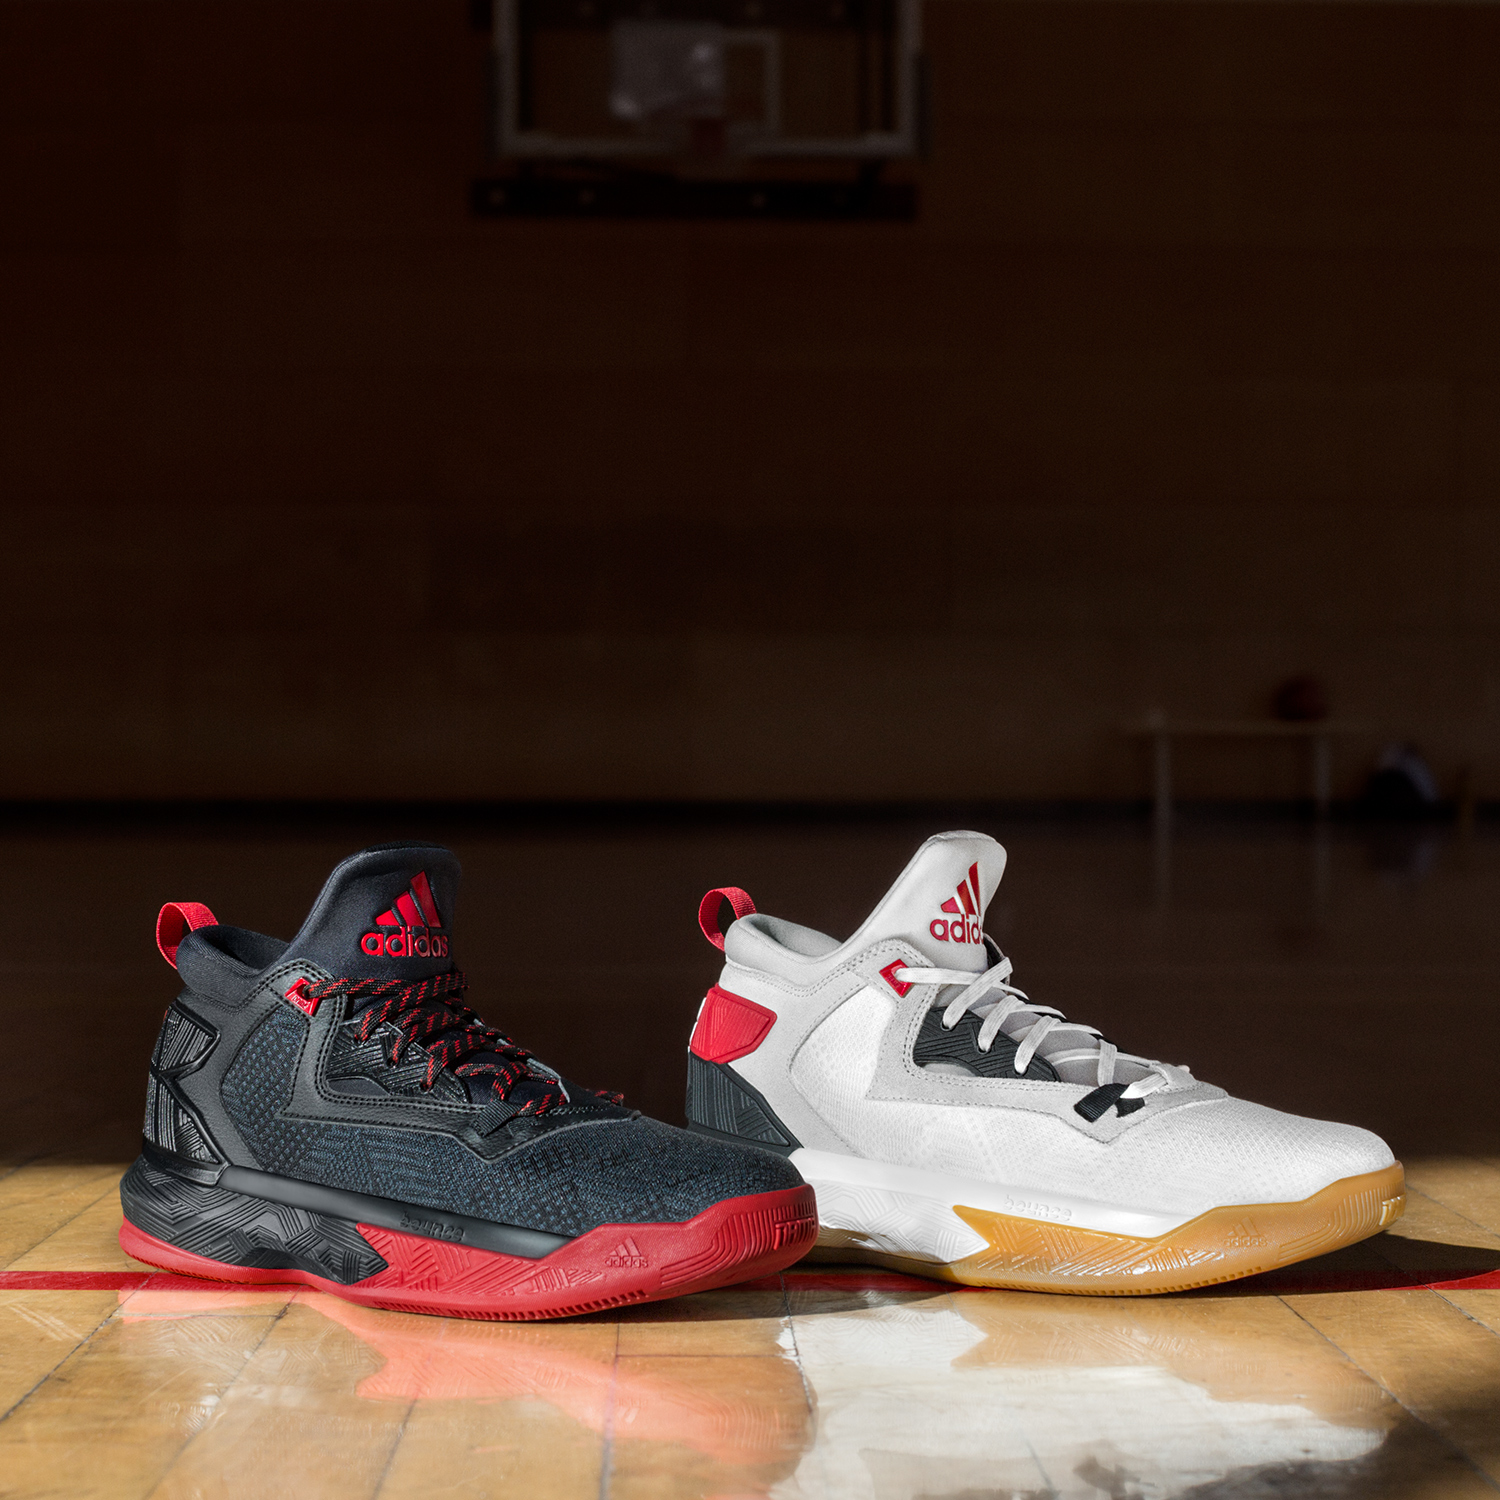 adidas and Damian Lillard officially unveil 